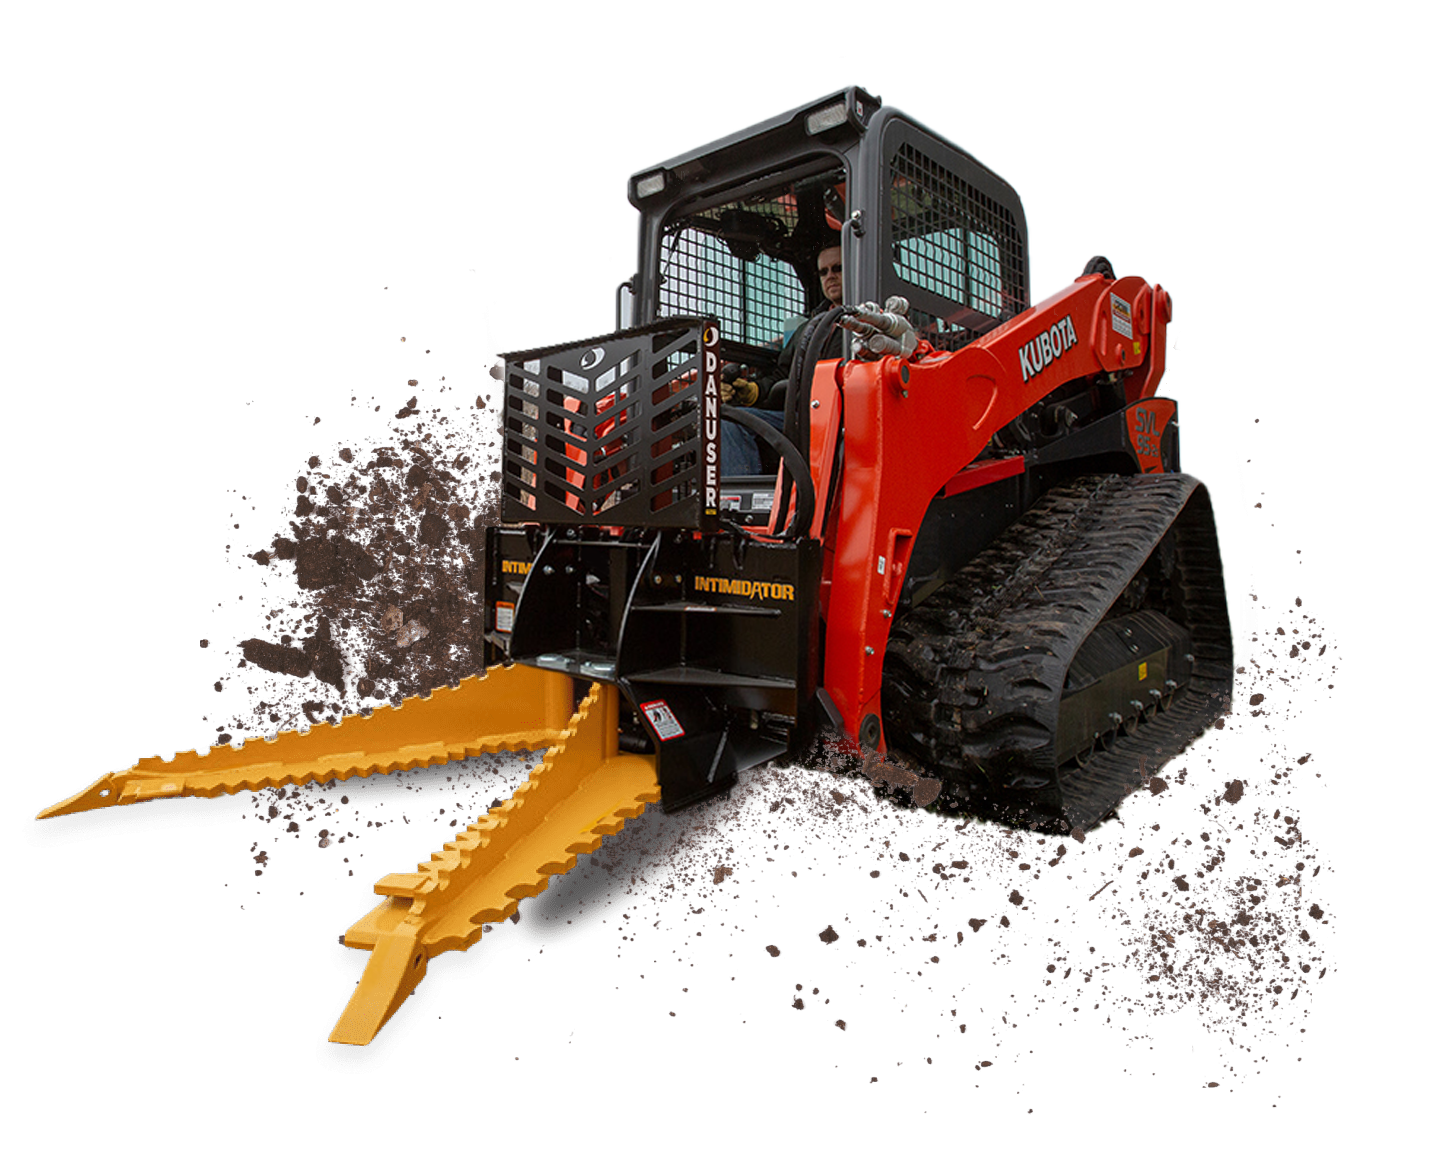 Danuser With over 100 years of experience with the latest in manufacturing technology, we are dedicated to remaining the benchmark in industrial and agricultural attachments.